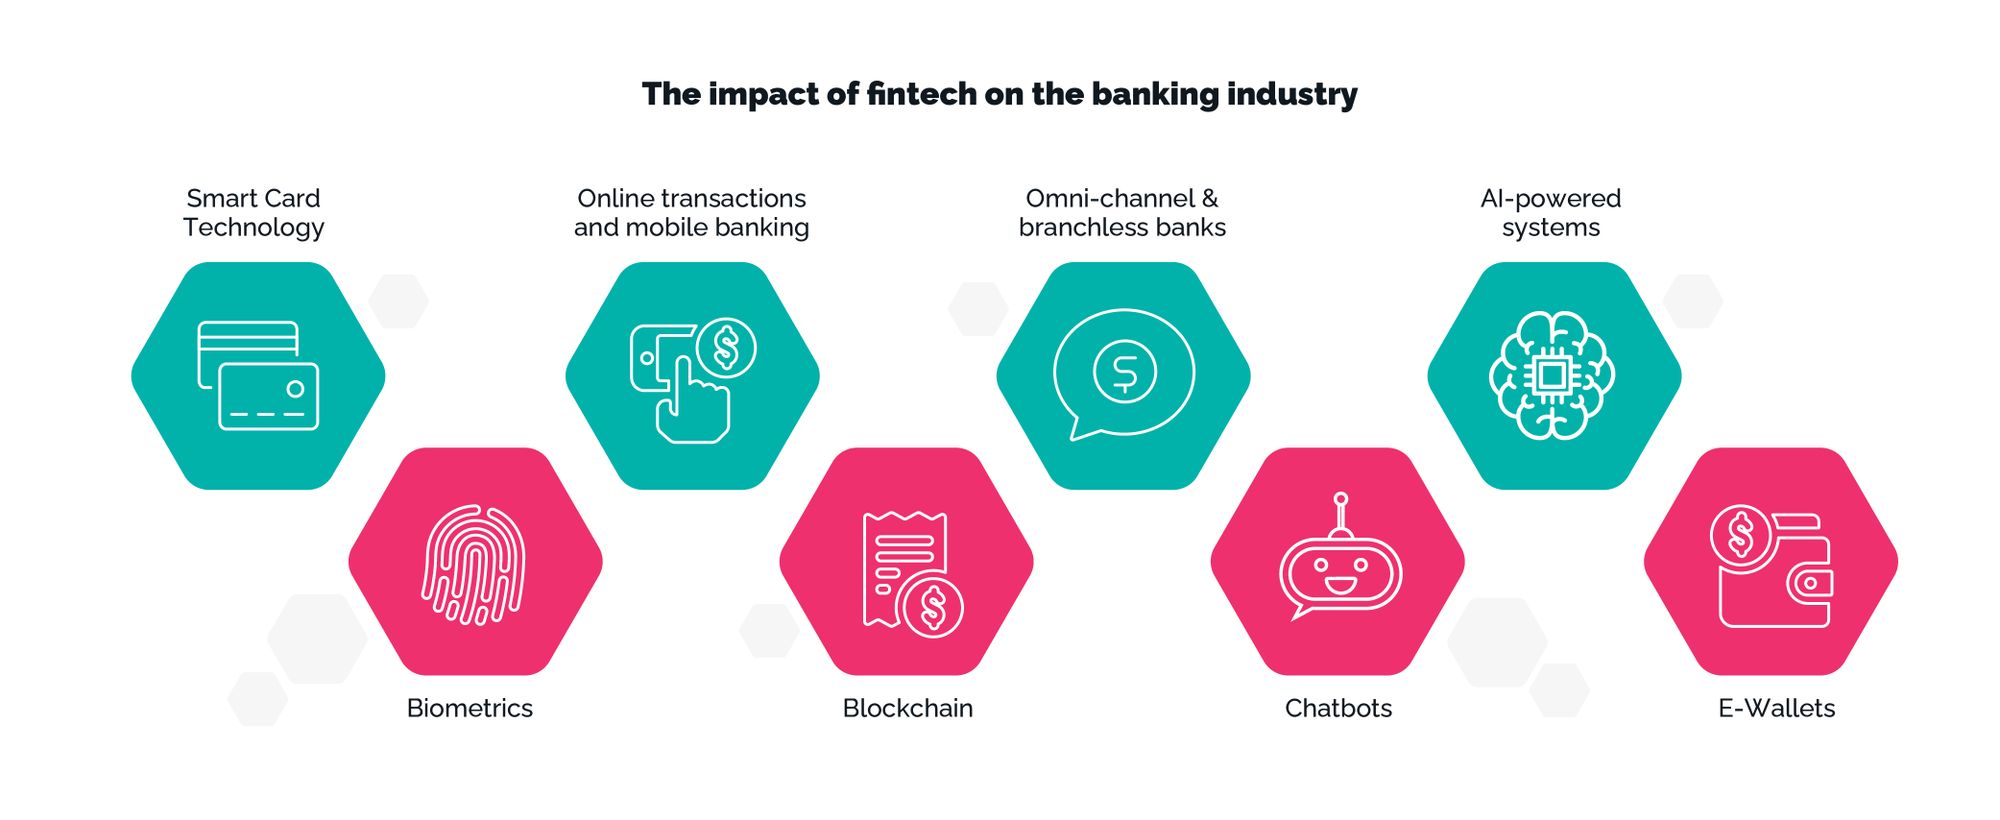 The impact of fintech in the banking industry